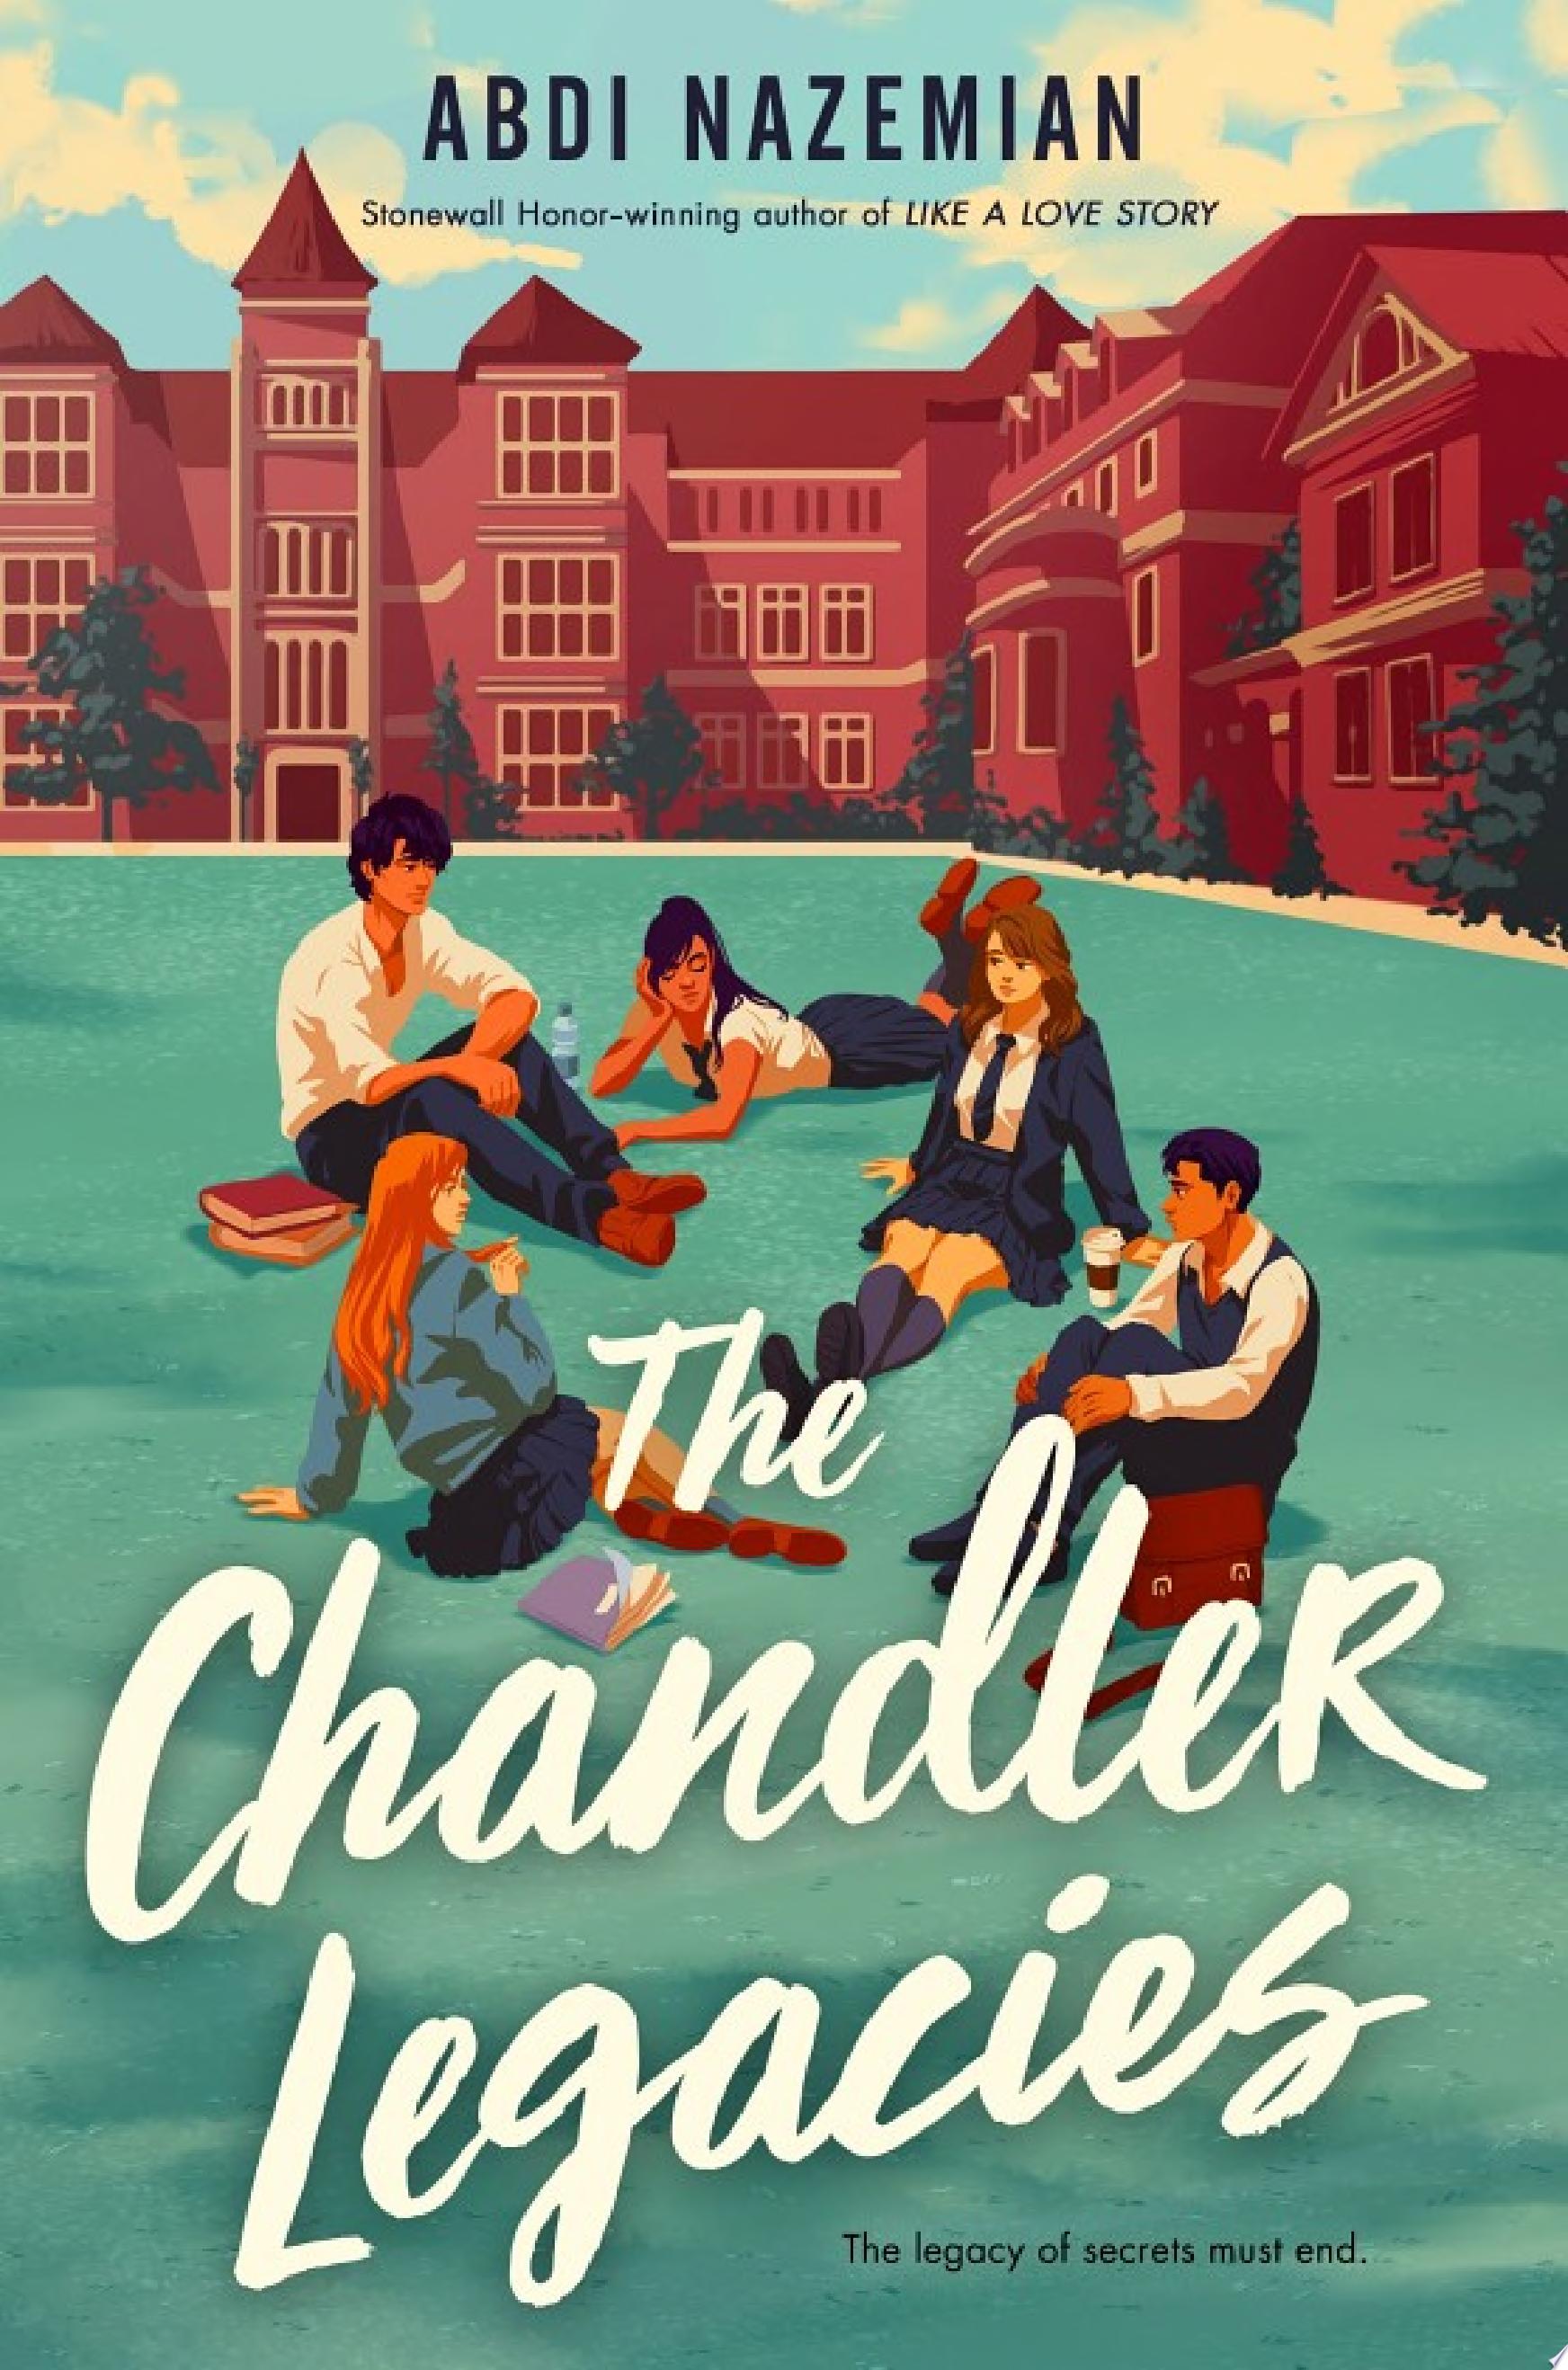 Image for "The Chandler Legacies"